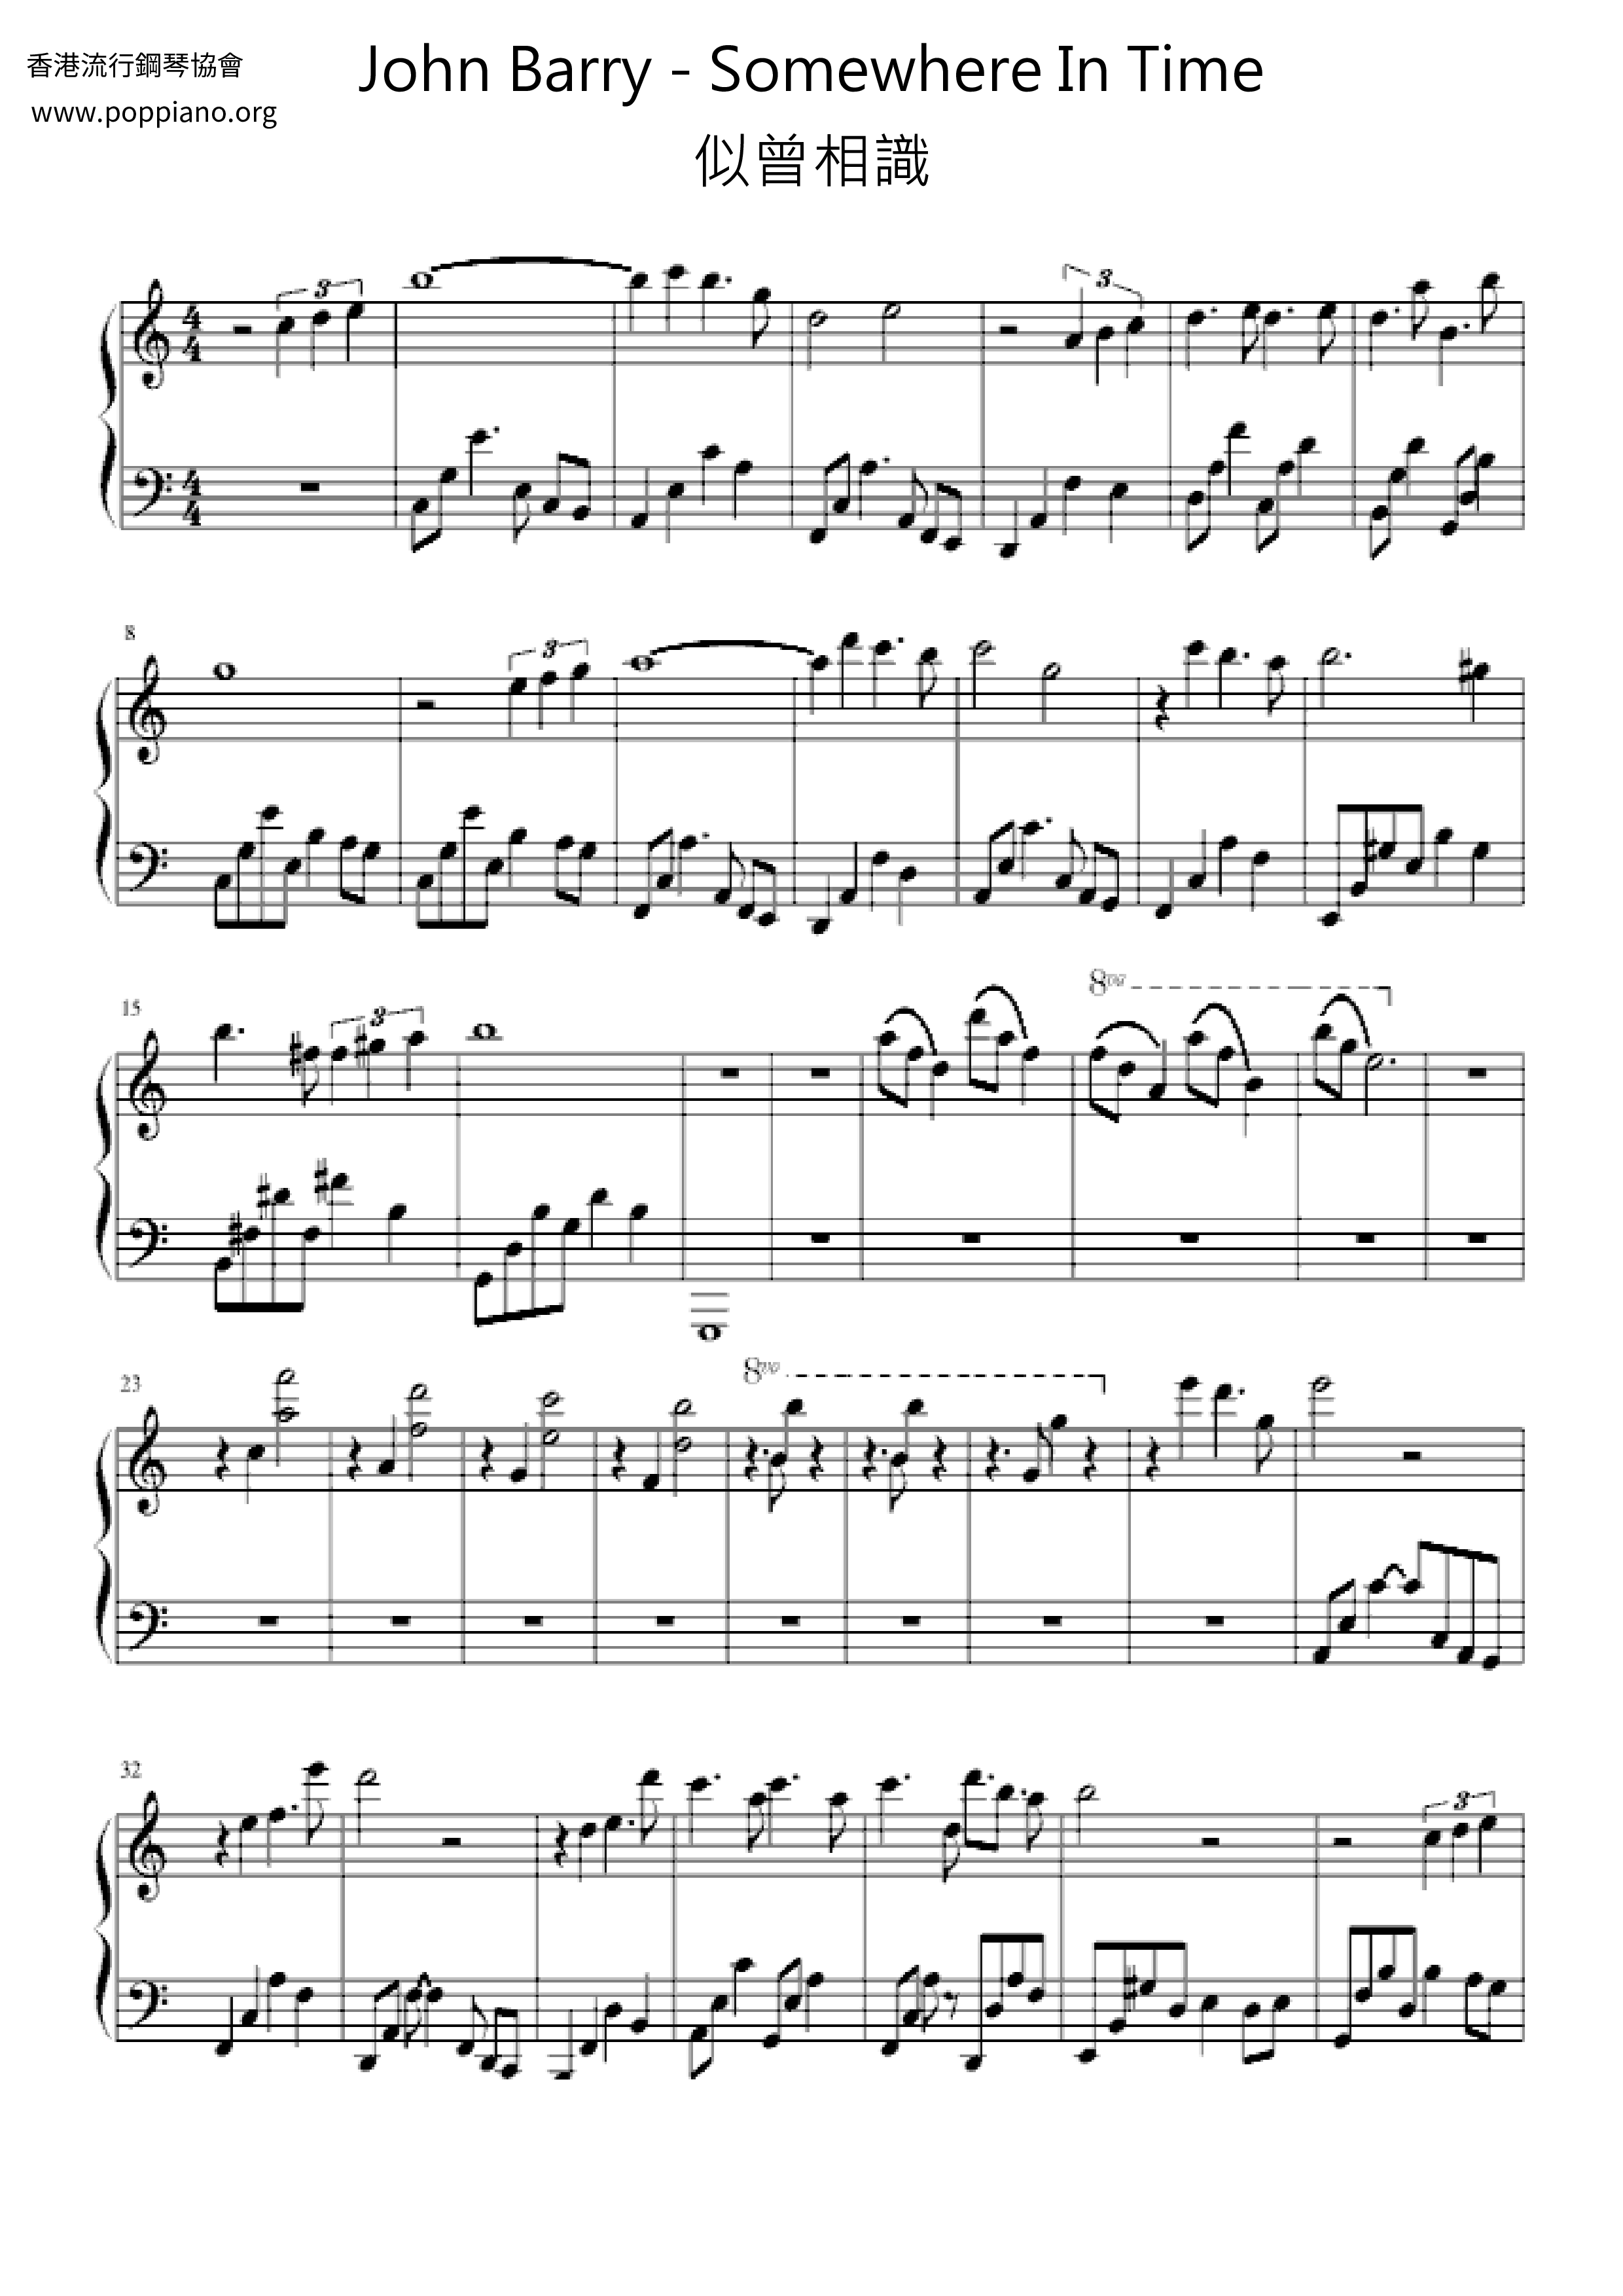 Somewhere In Time Score